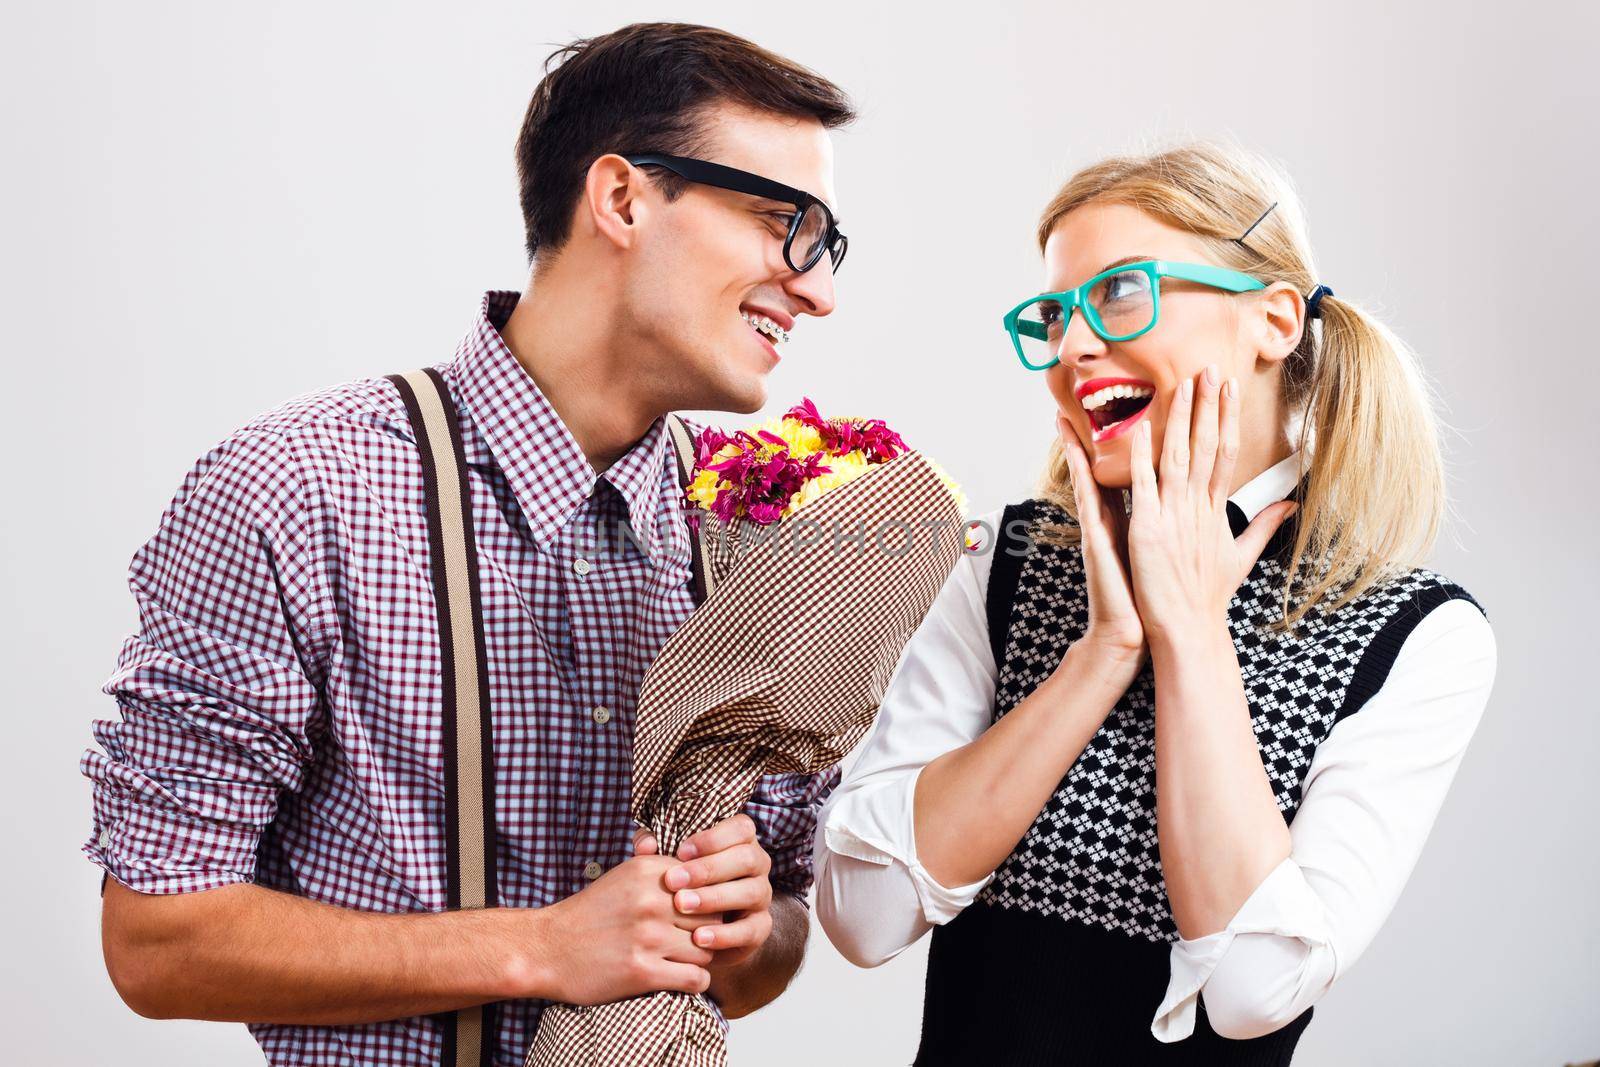 Nerdy man is giving flowers to his nerdy lady by Bazdar